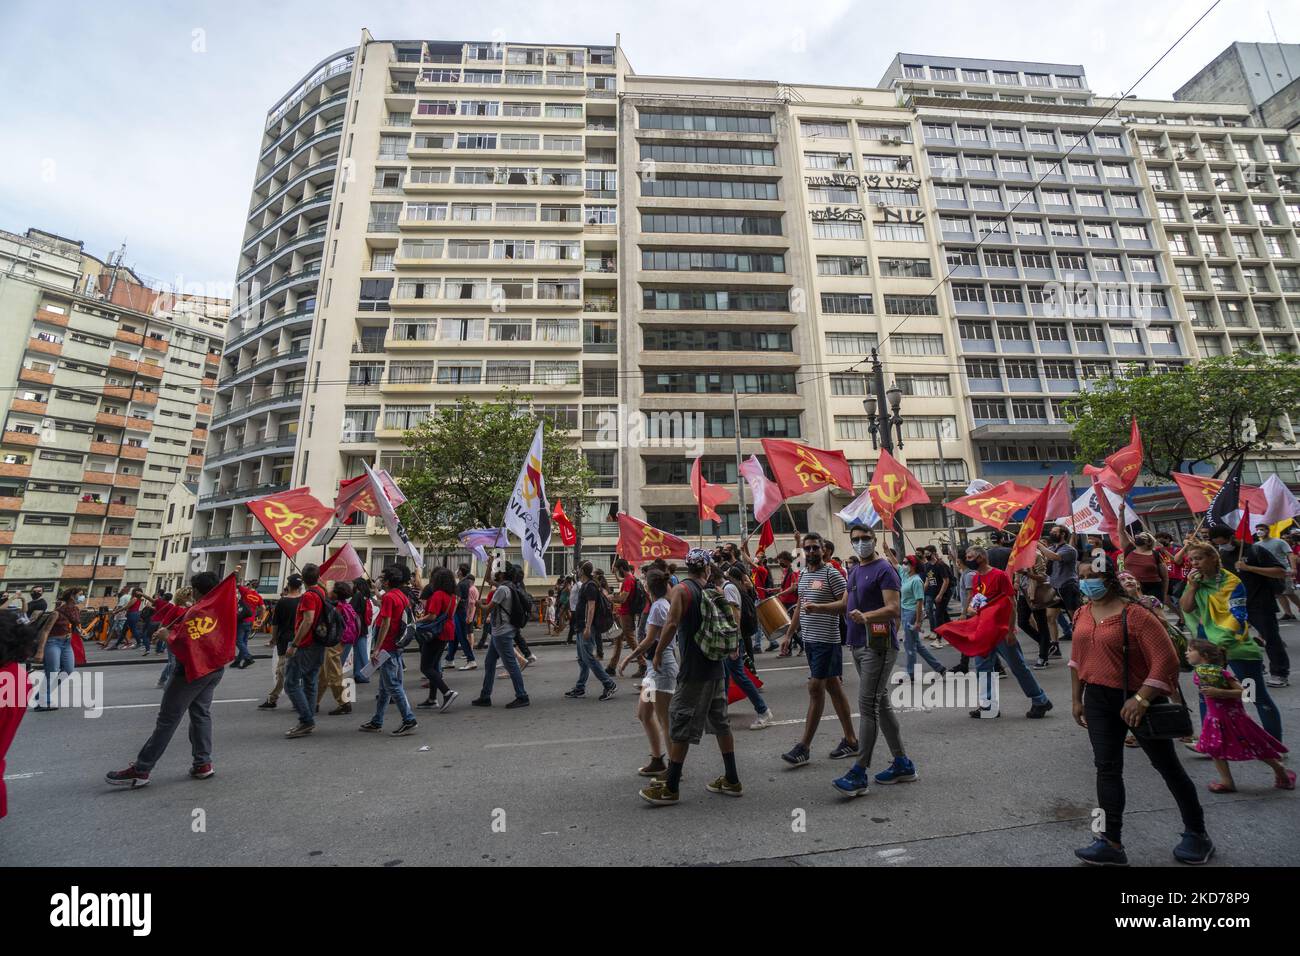 Members of opposition parties and social movements protest against Brazilian President Jair Bolsonaro's handling on unemployment and hike fuel prices, in downtown Sao Paulo, Brazil, on April 9, 2022. (Photo by Cris Faga/NurPhoto) Stock Photo